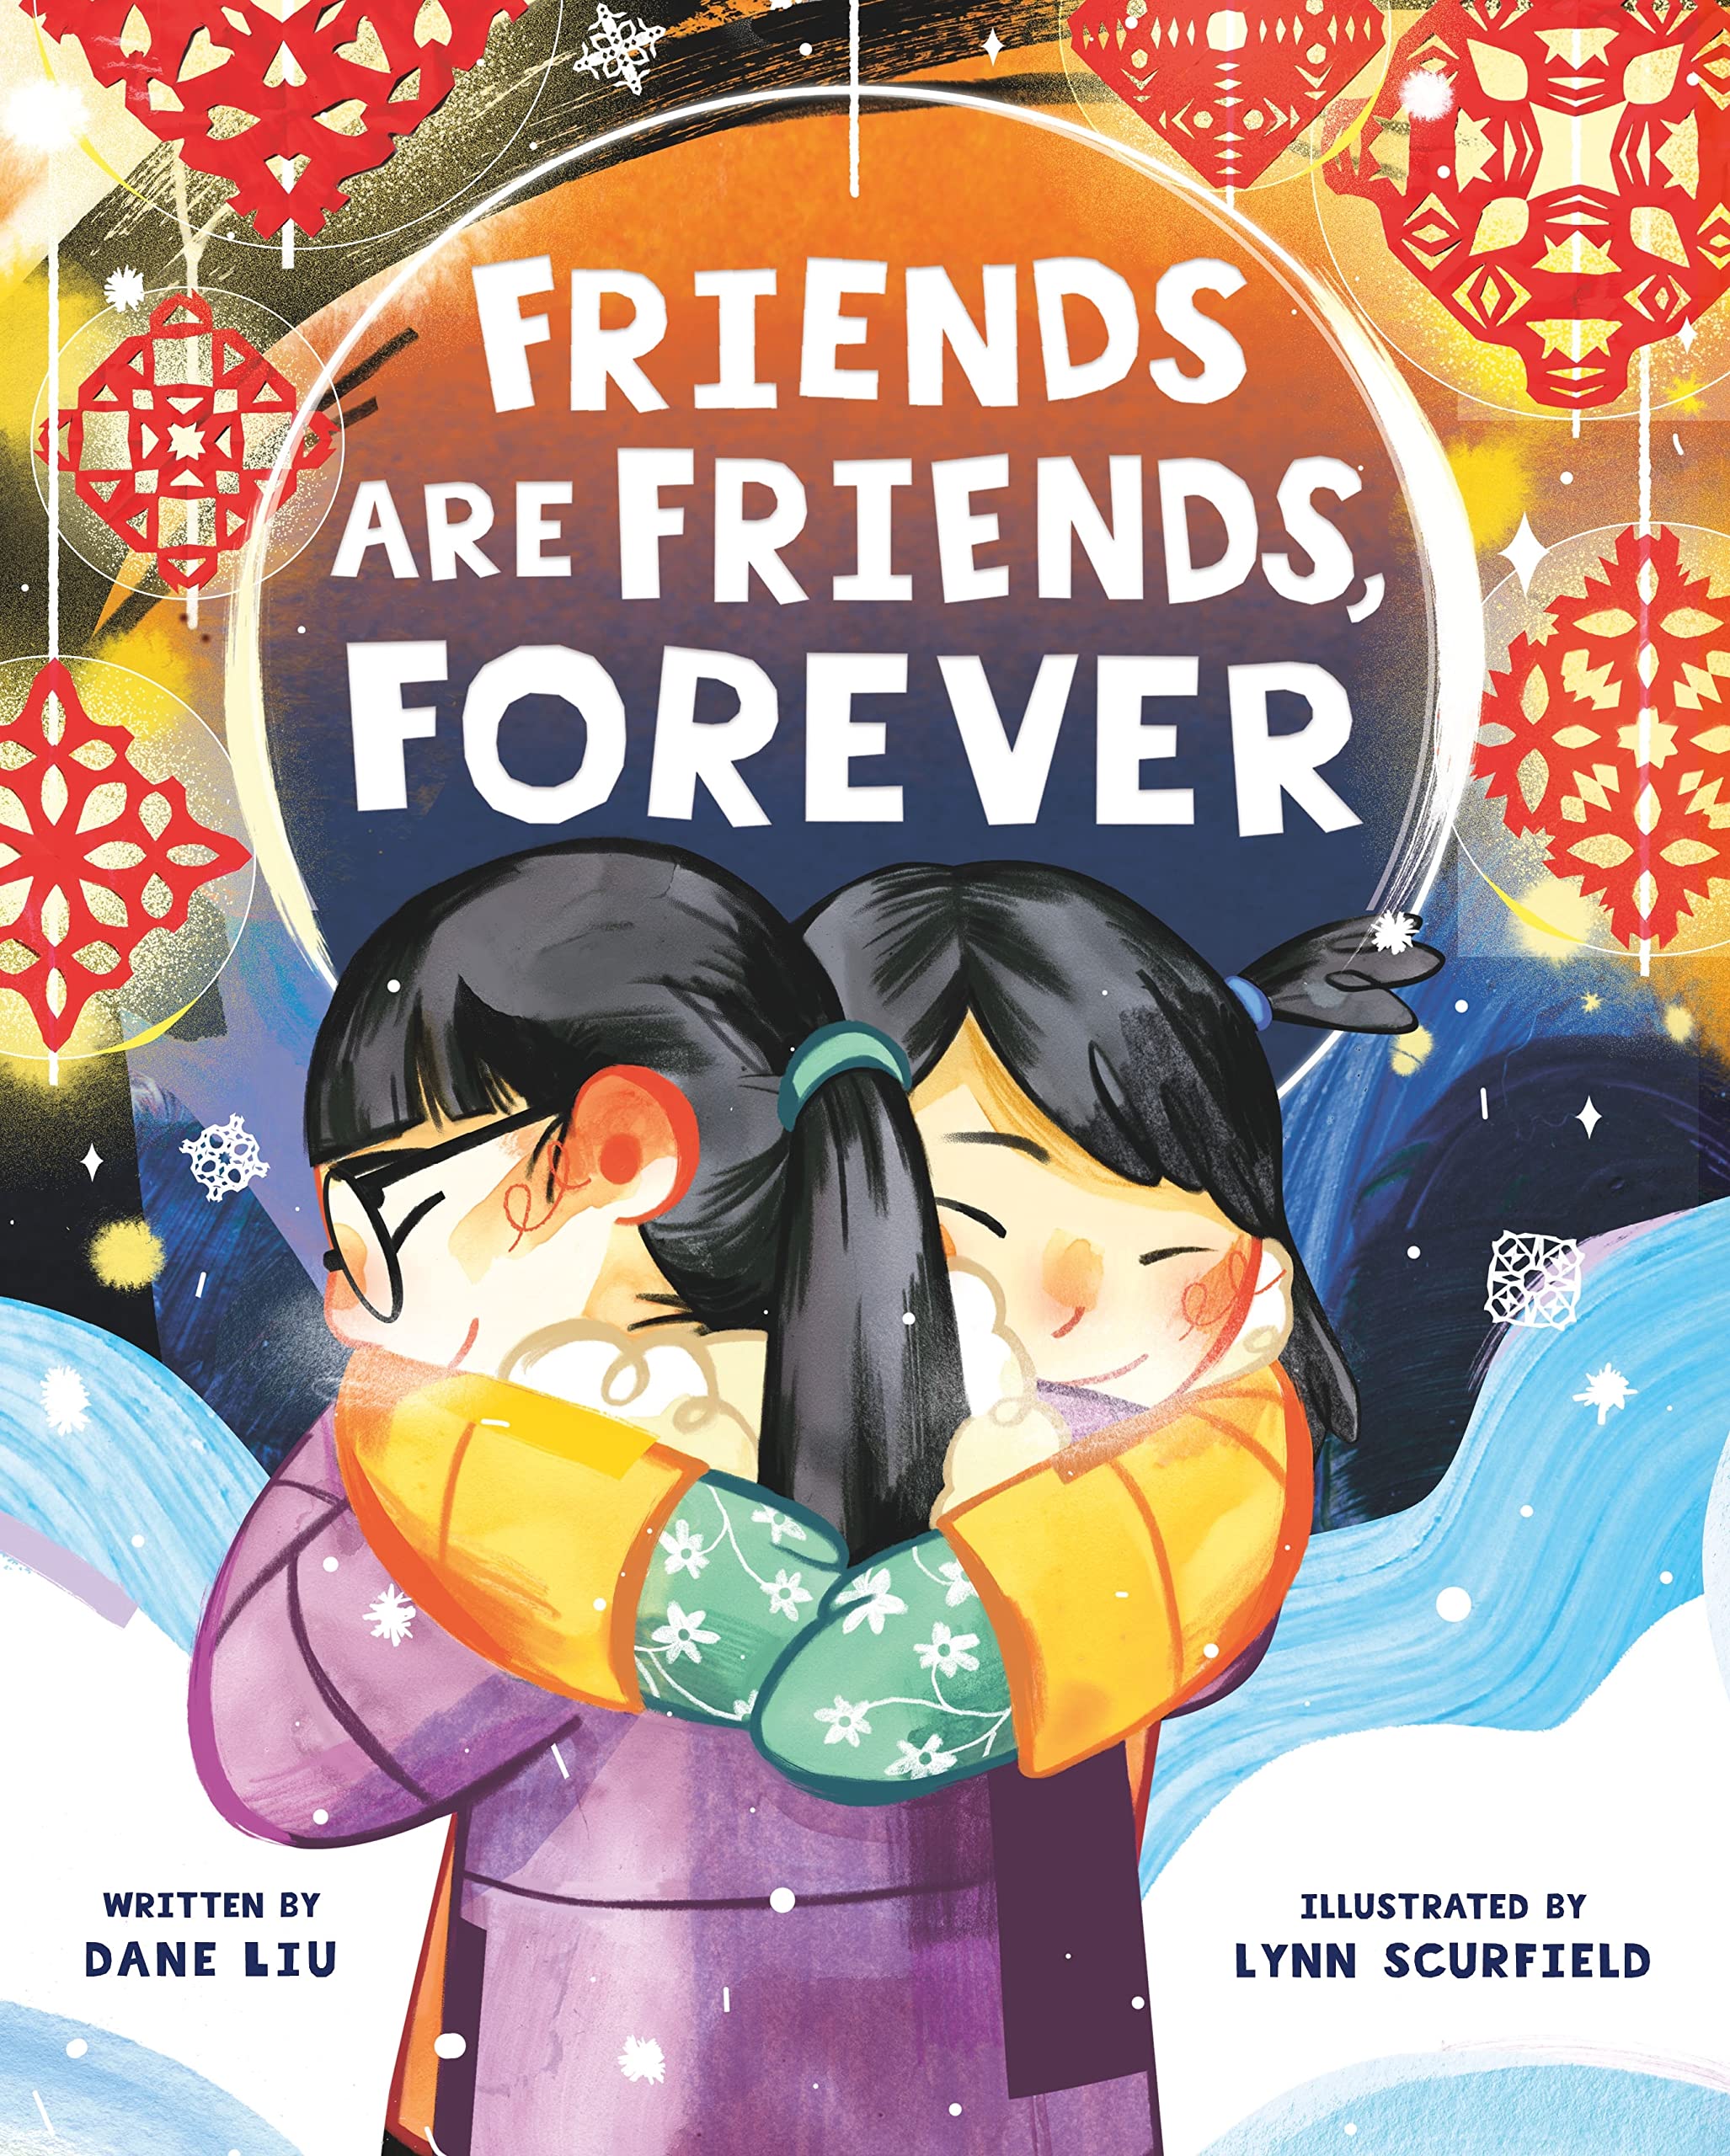 Book cover for "Friends are Friends Forever." Two children bundled up for winter weather hug.